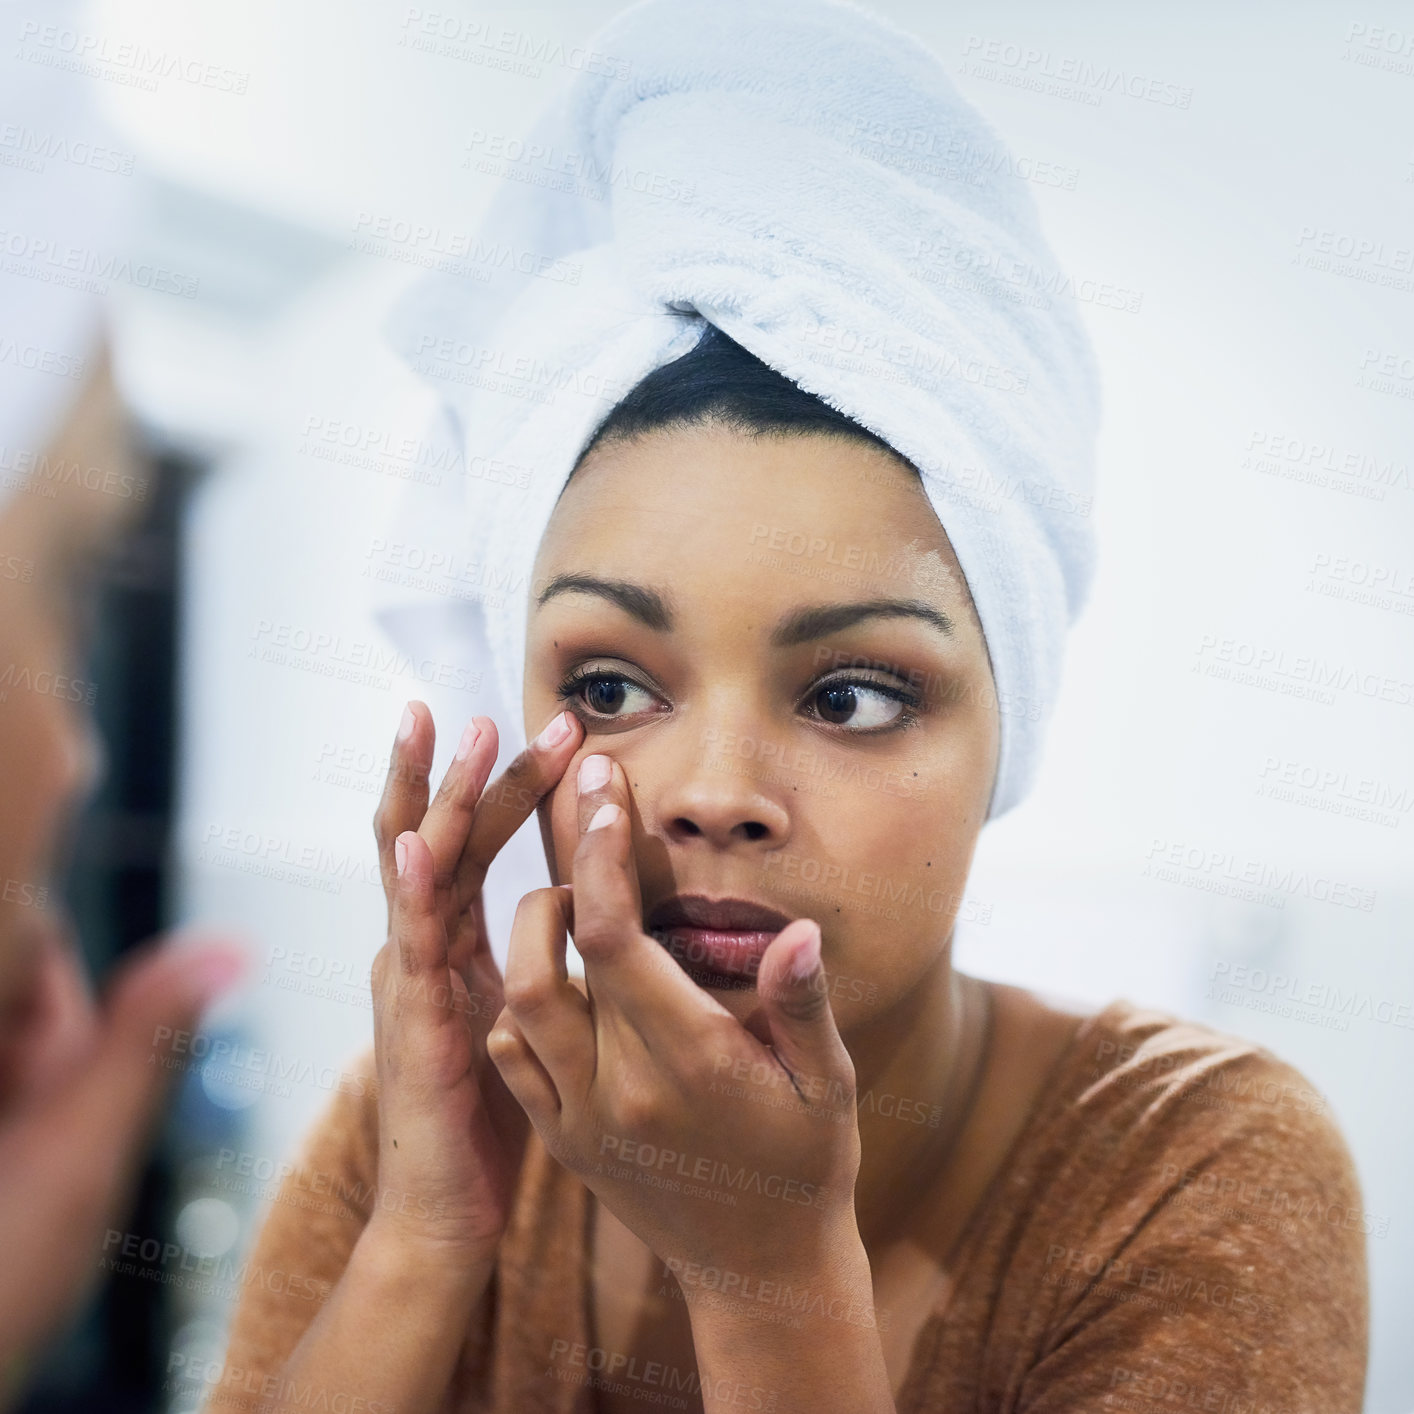 Buy stock photo Shot of a young woman adjusting her makeup in the bathroom mirror